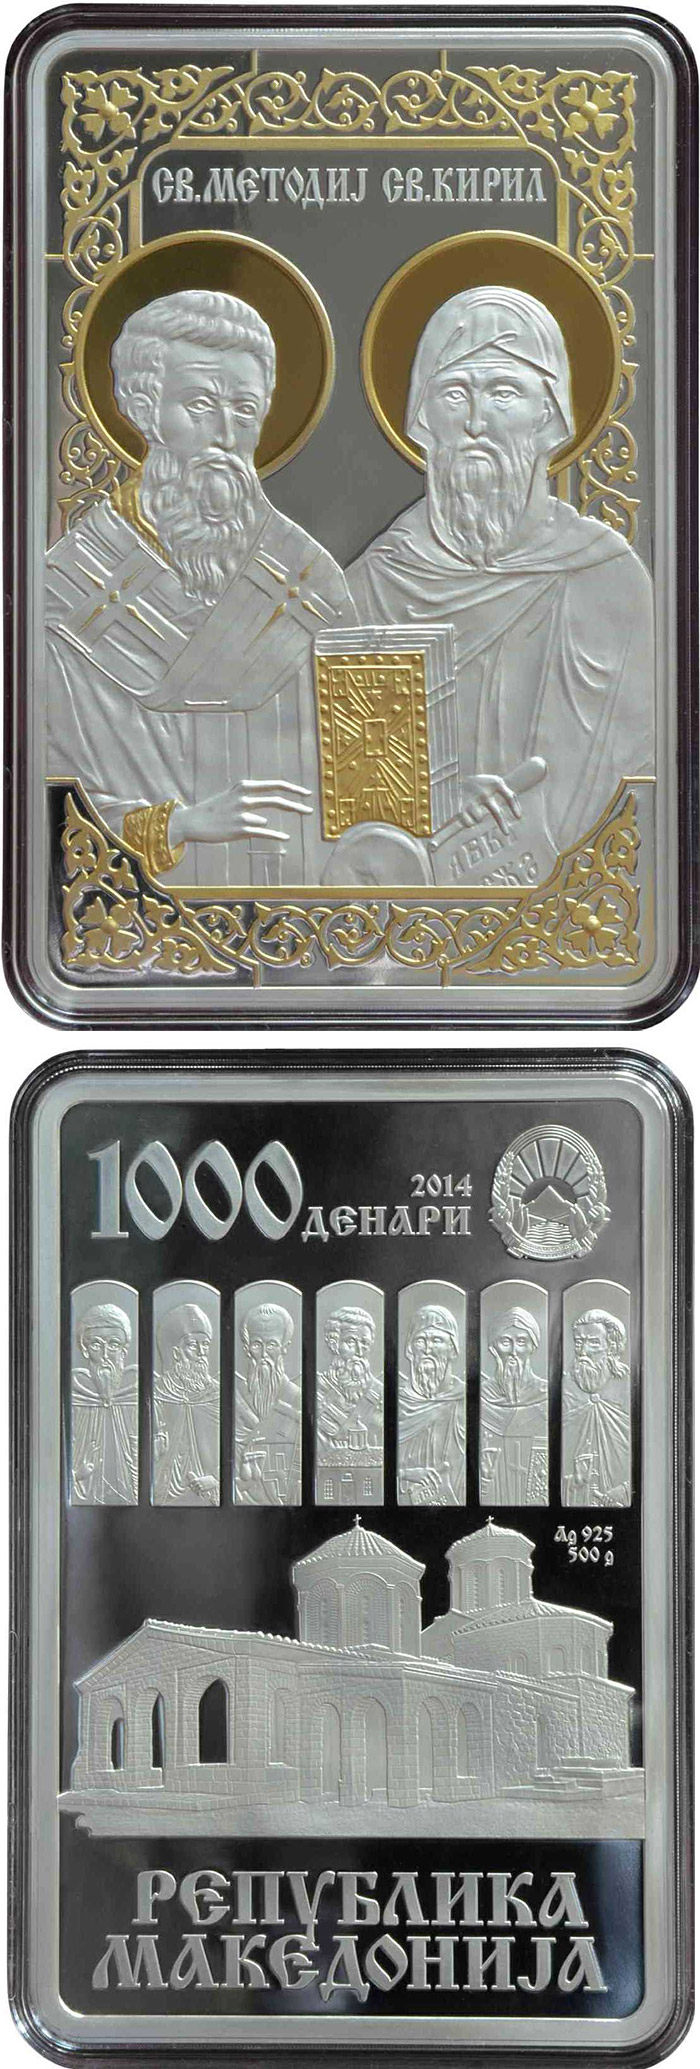 Image of 1000 denars coin - Cyril and Methodius  | Macedonia 2014.  The Silver coin is of Proof quality.